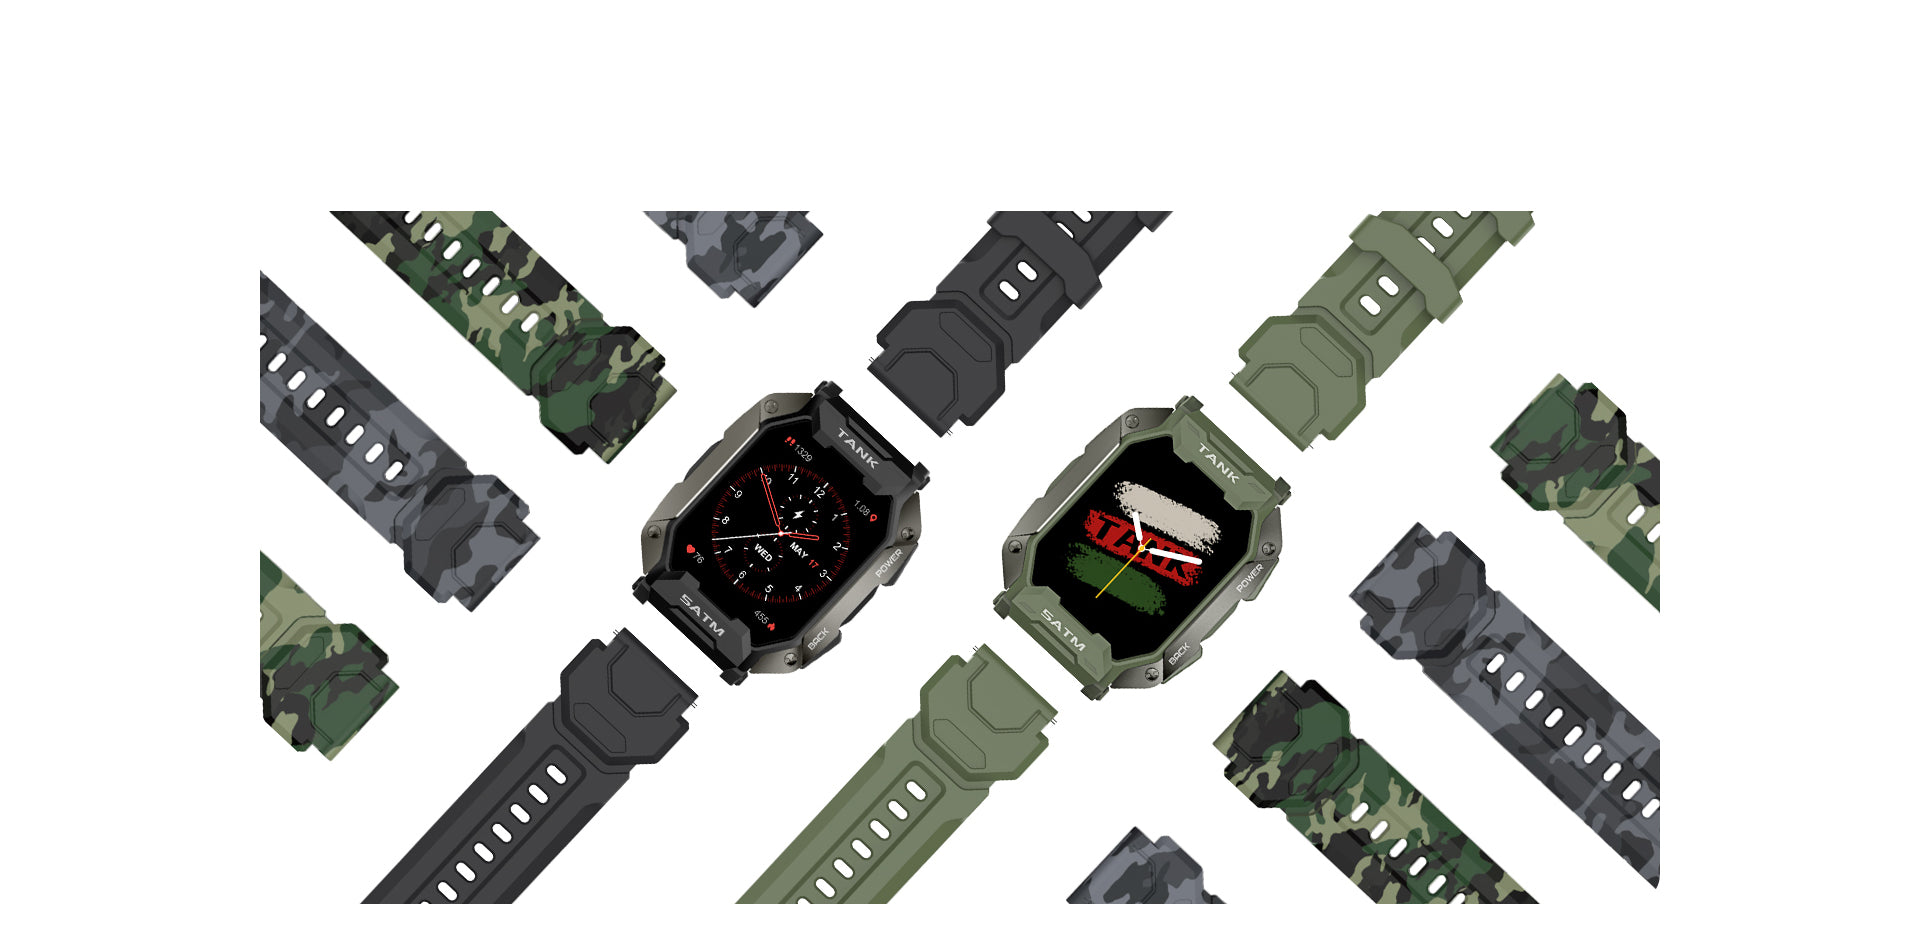 KOSPET TANK M1 Rugges Smartwatch, two colors black and green